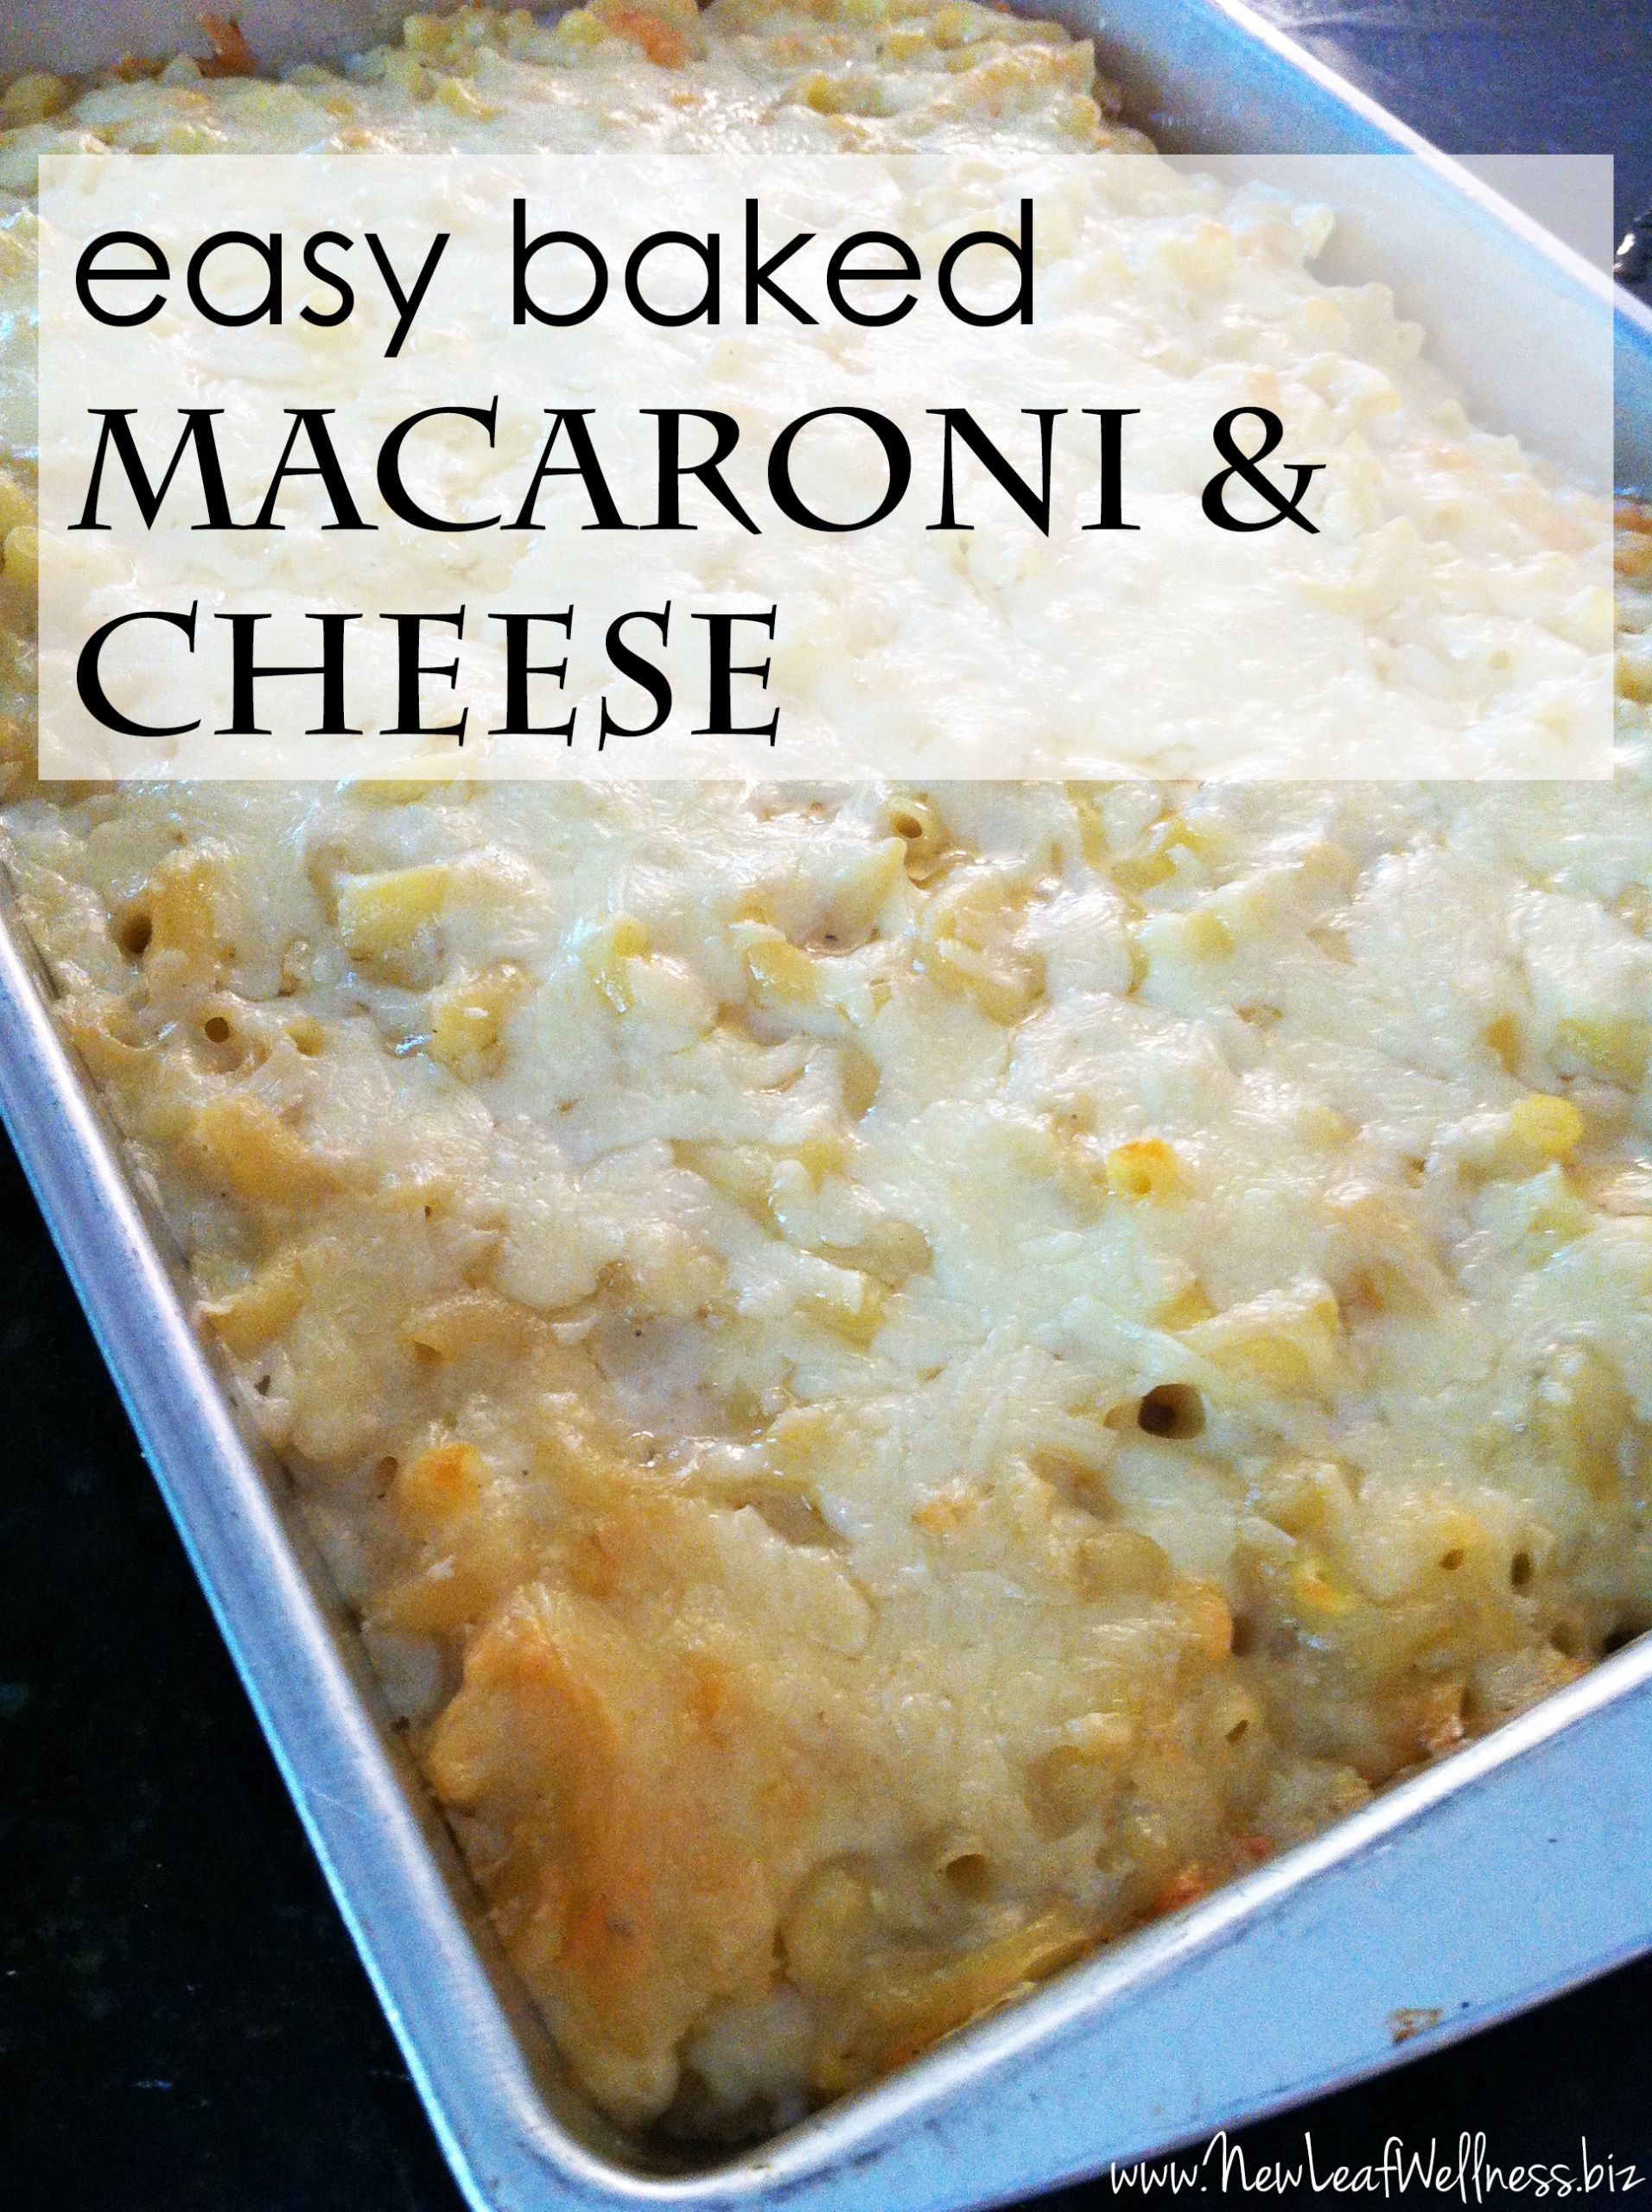 Macaroni And Cheese Baked Recipe Easy
 Mary’s easy baked macaroni and cheese recipe